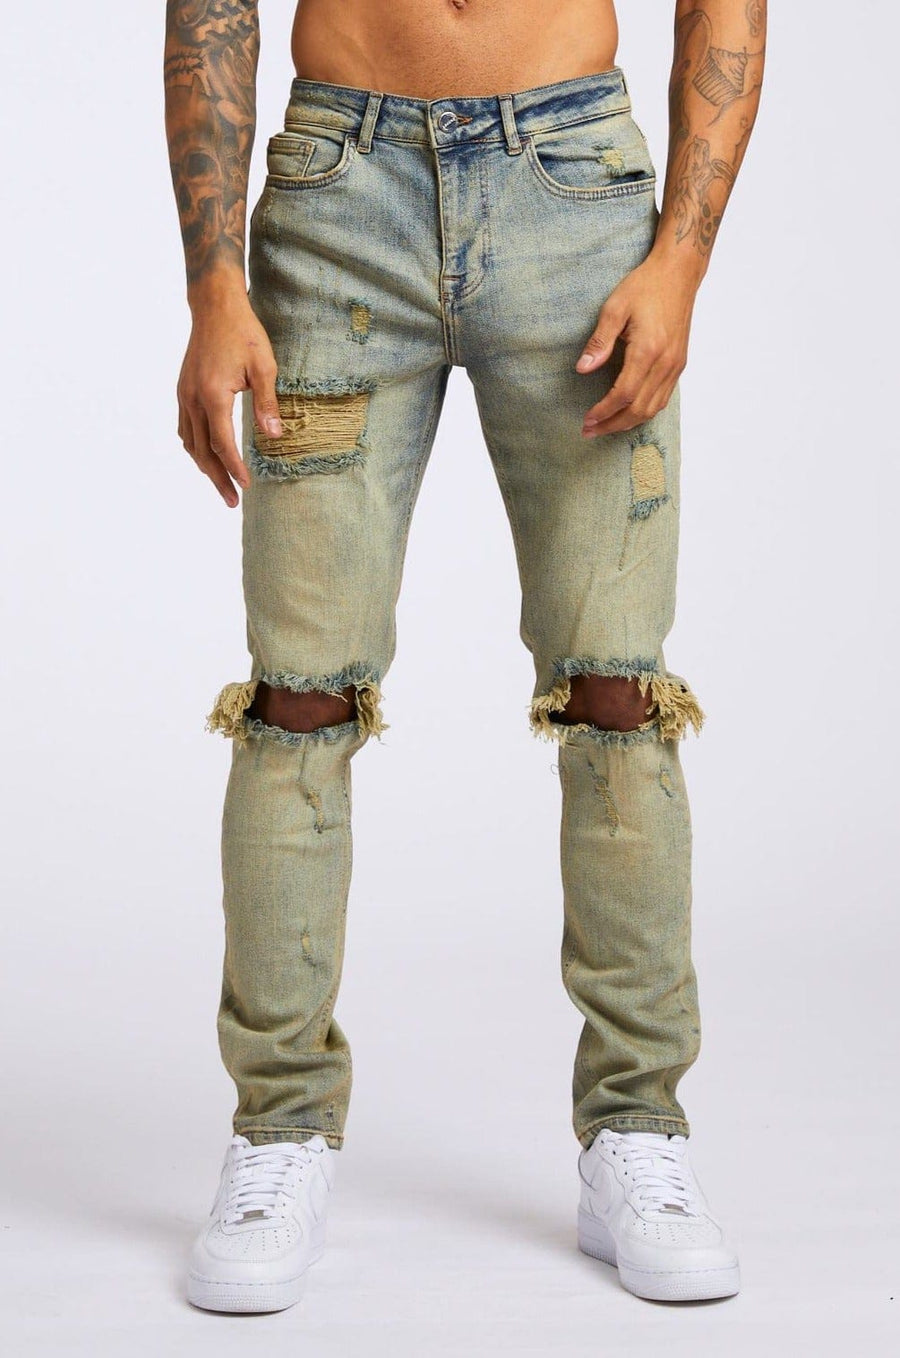 Legend London Jeans SLIM FIT JEANS - VINTAGE STONE WASH RIPPED & REPAIRED